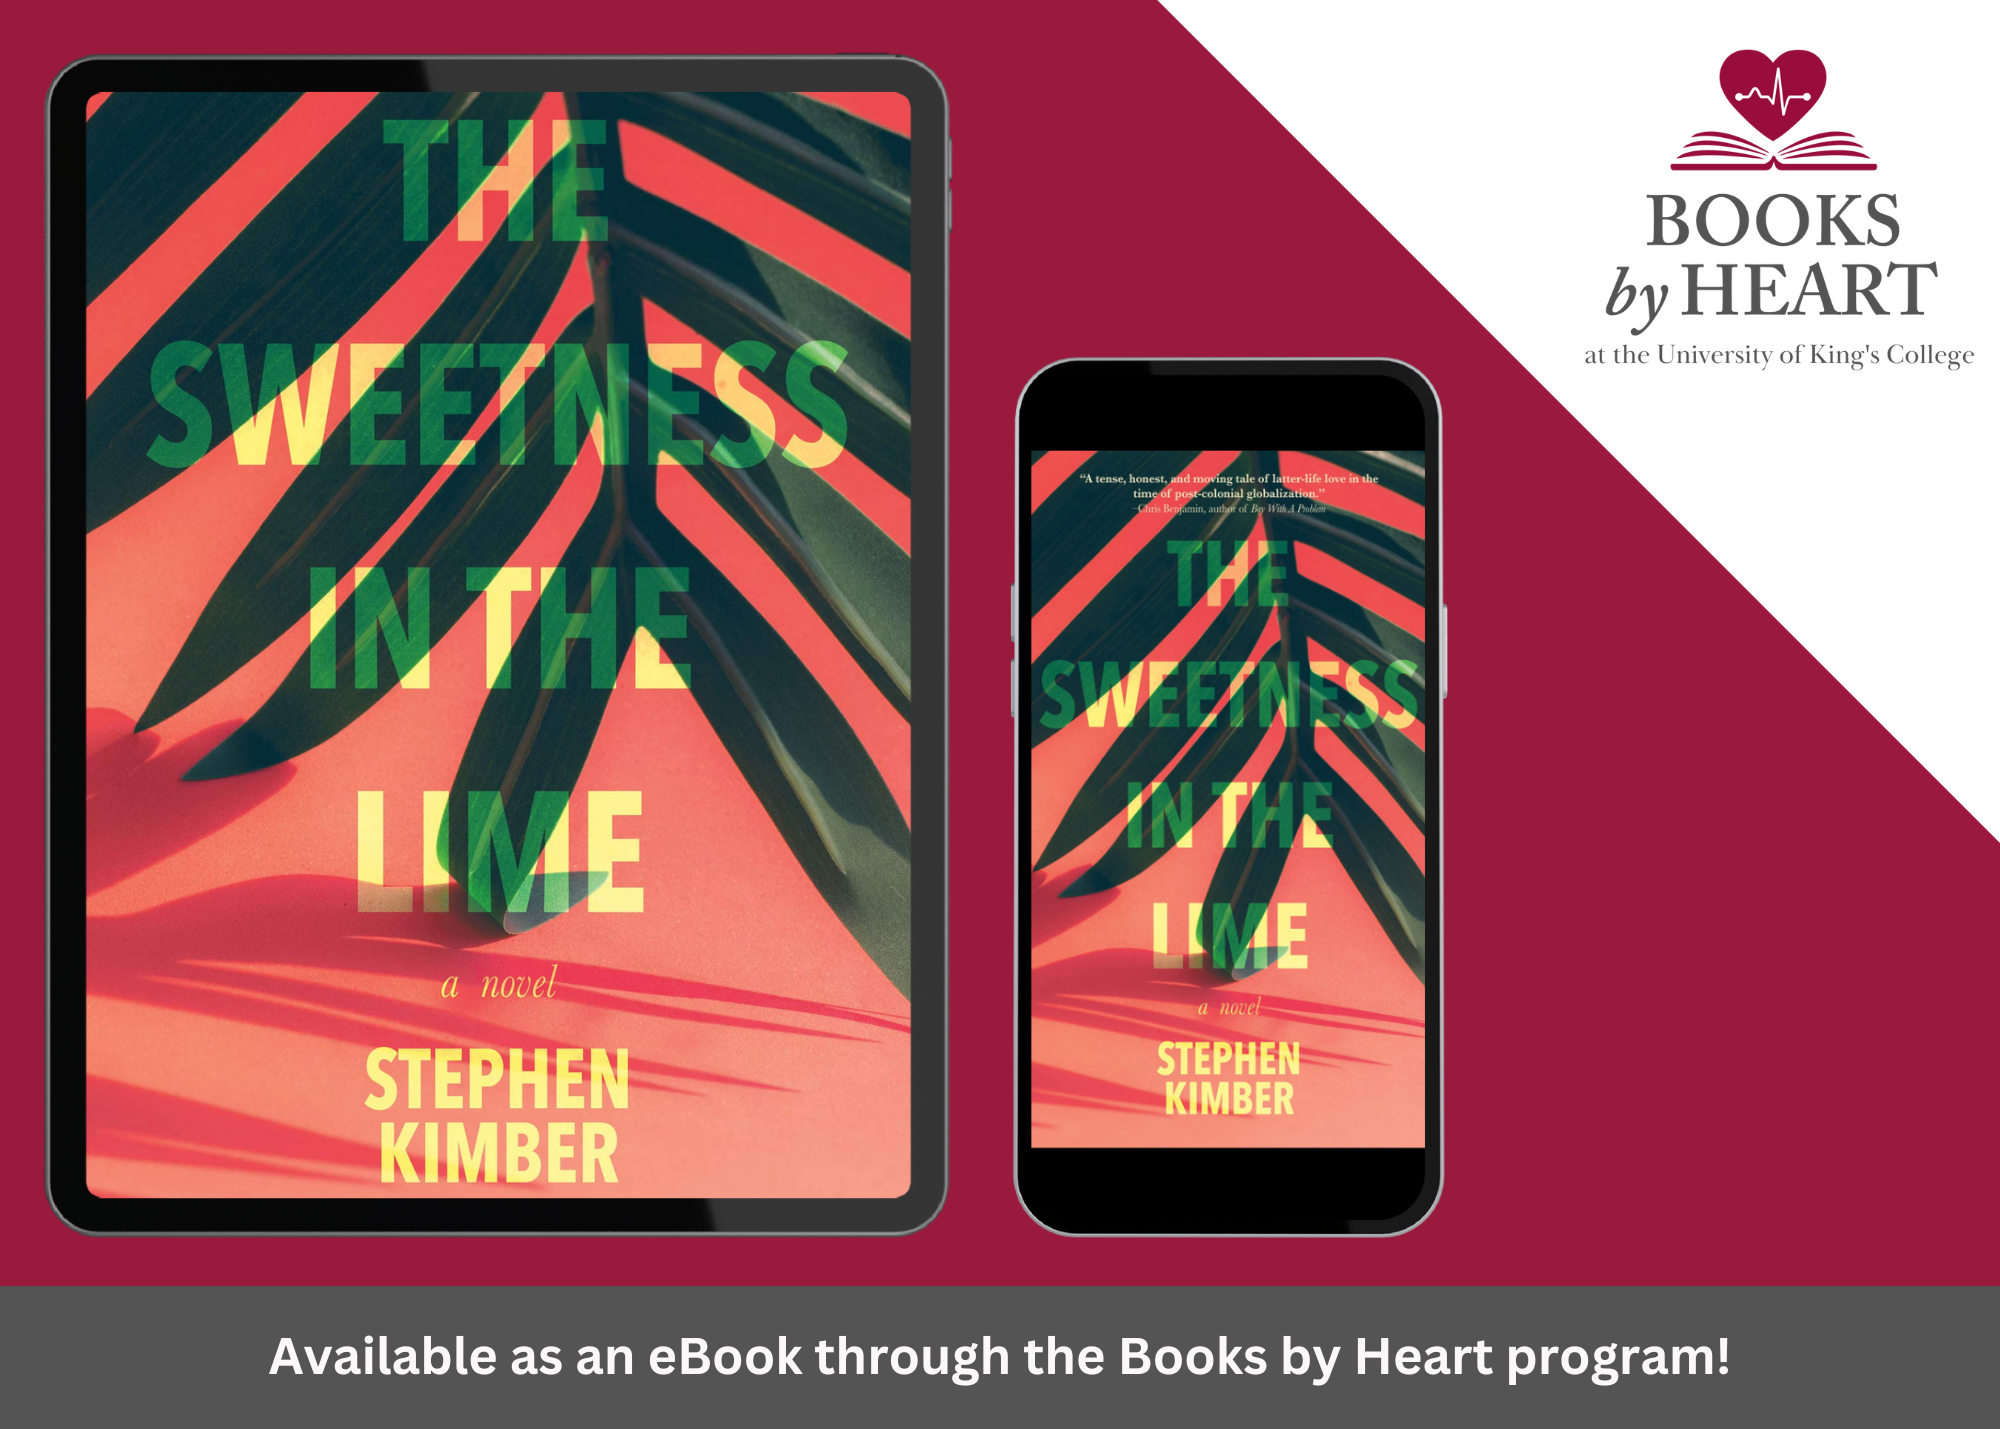 Books By Heart: The Sweetness in the Lime by Stephen Kimber